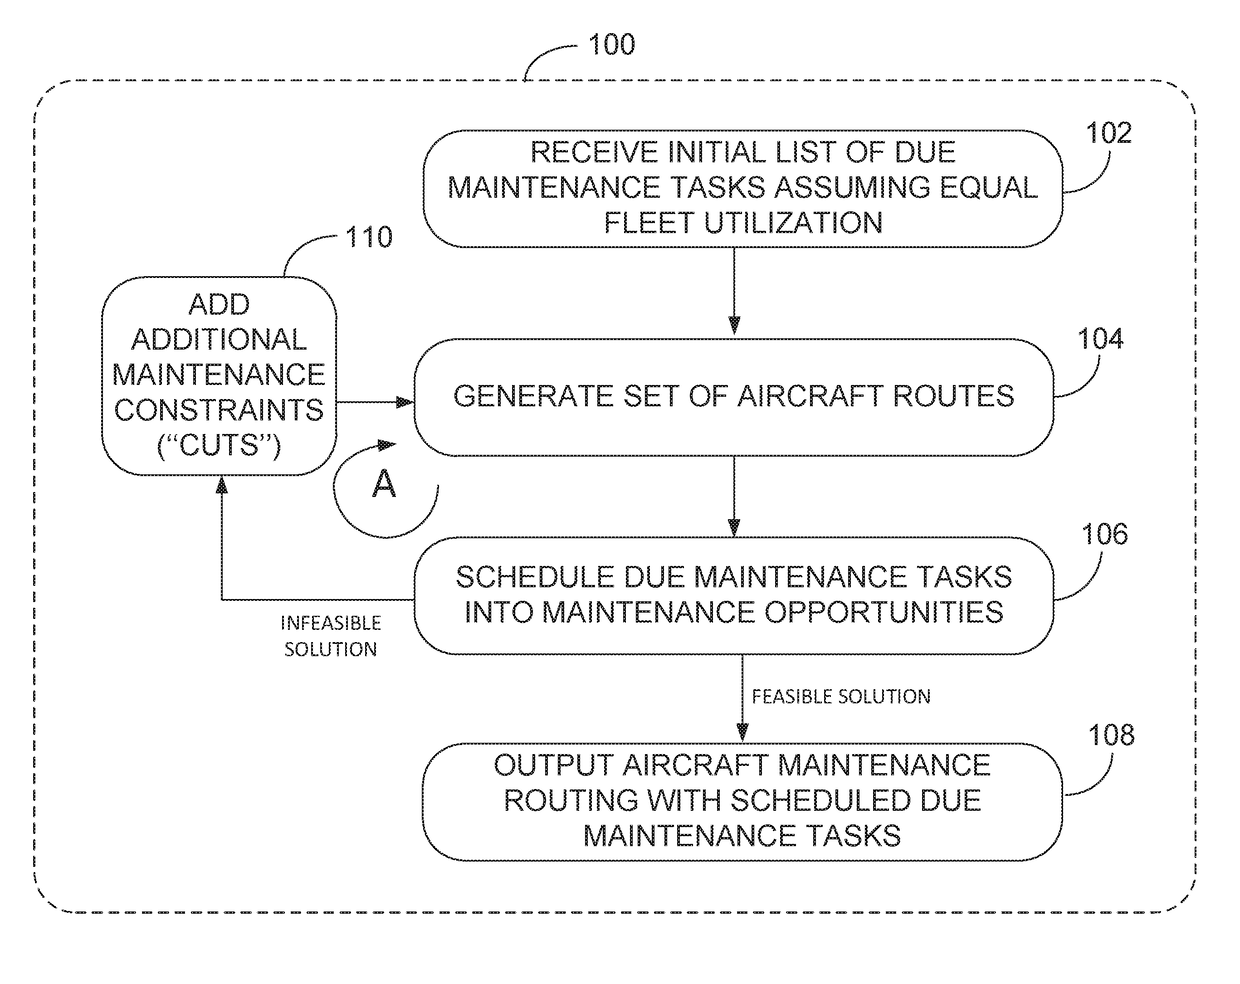 Combined aircraft maintenance routing and maintenance task scheduling